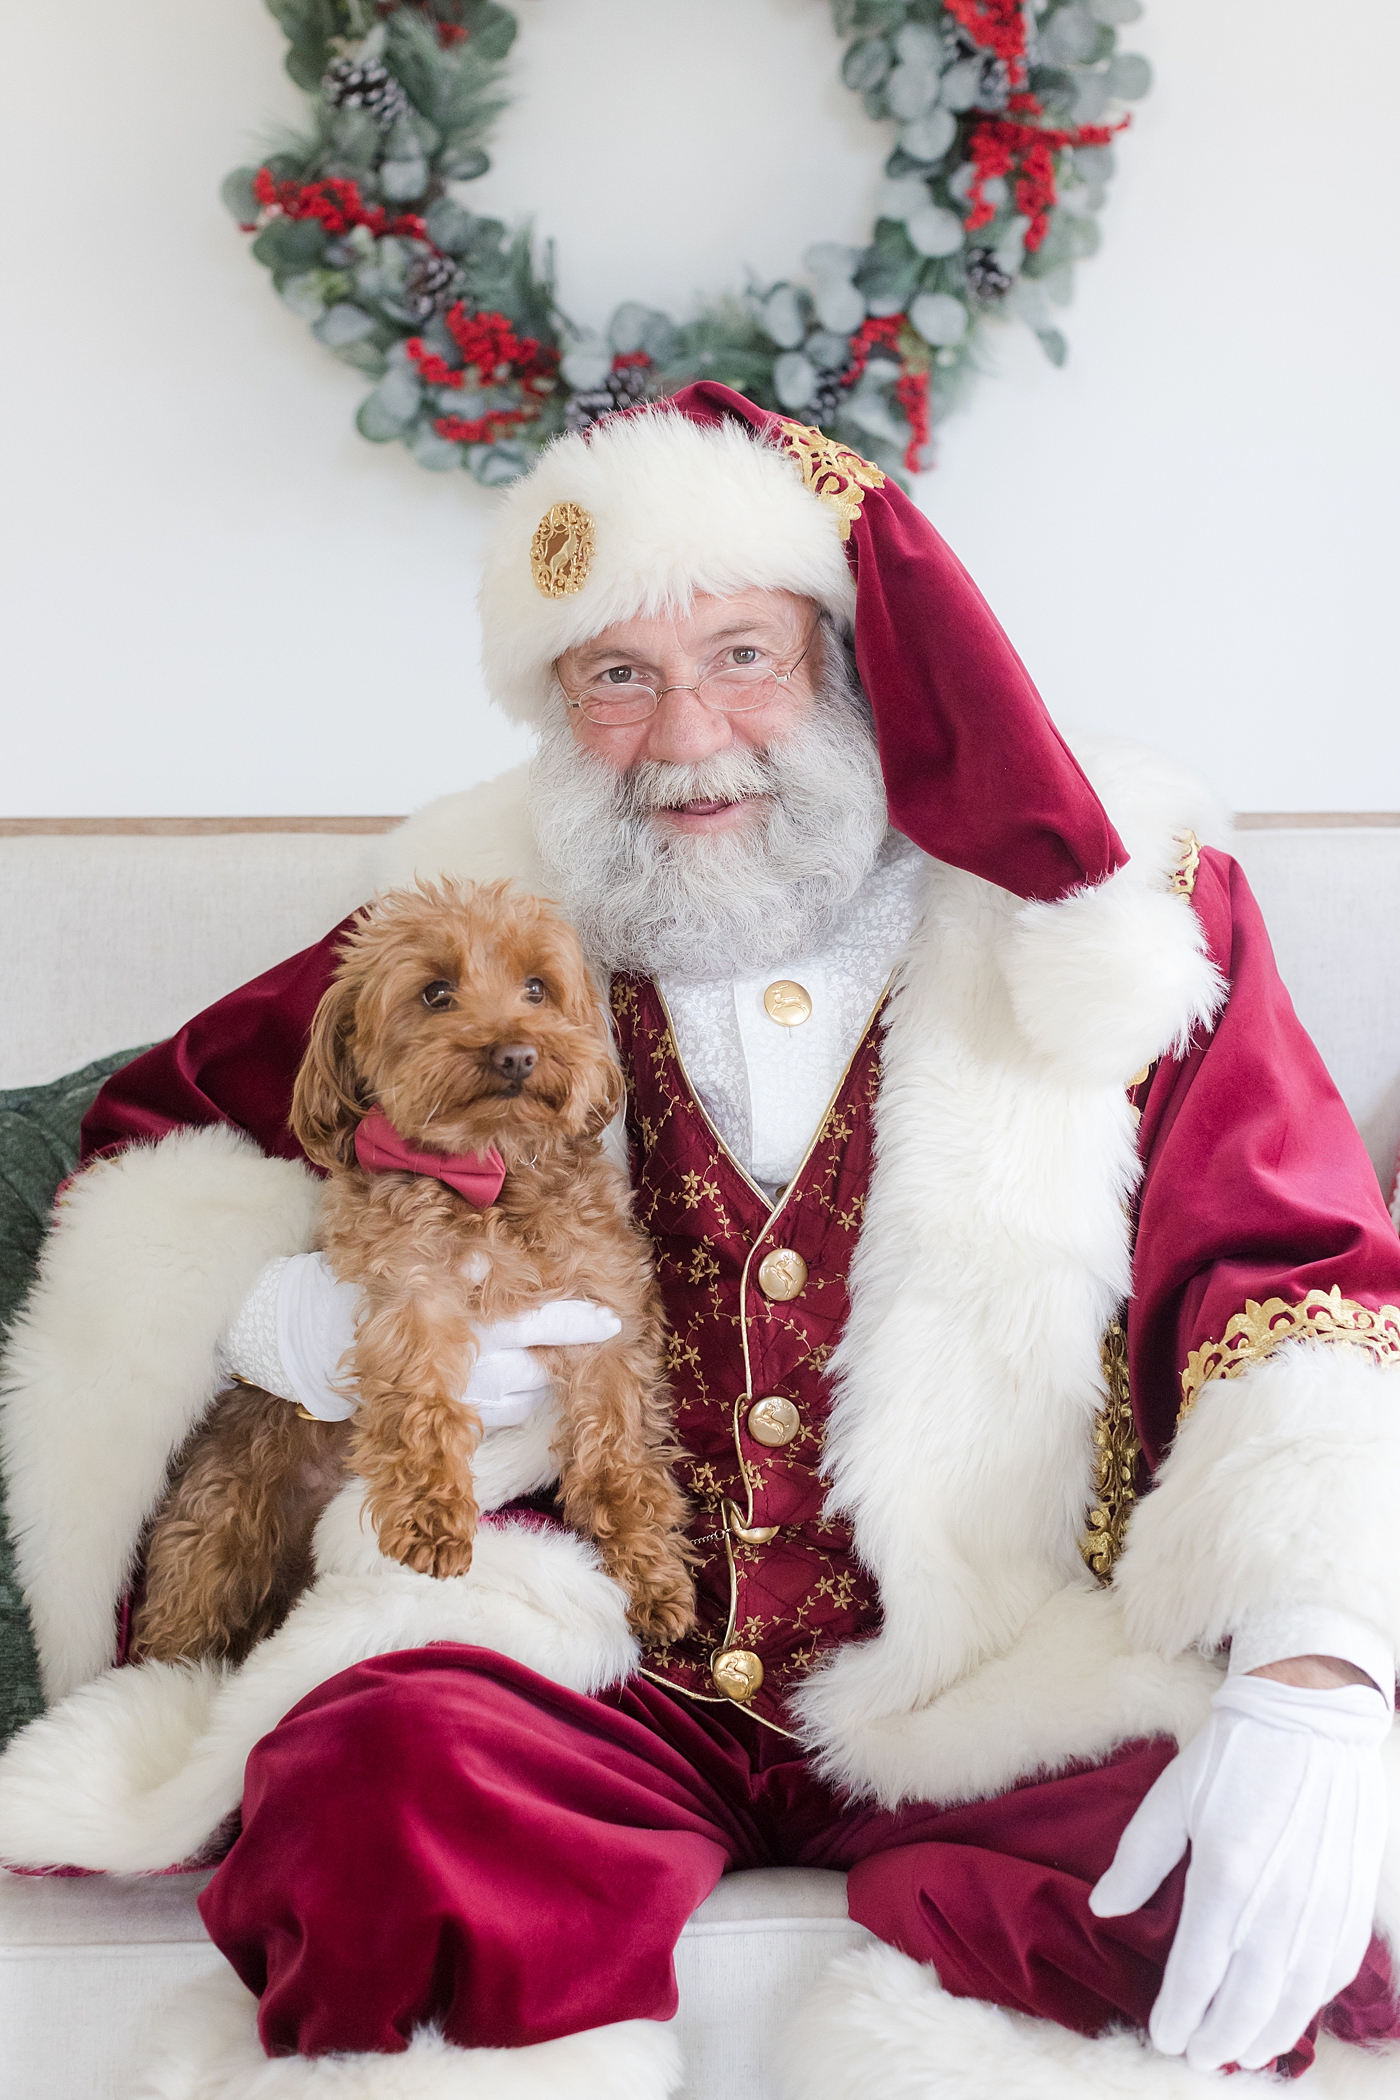 northern-virginia-photographer-mini-session Santa sitting with a puppy | Image by Emily Gerald Photography